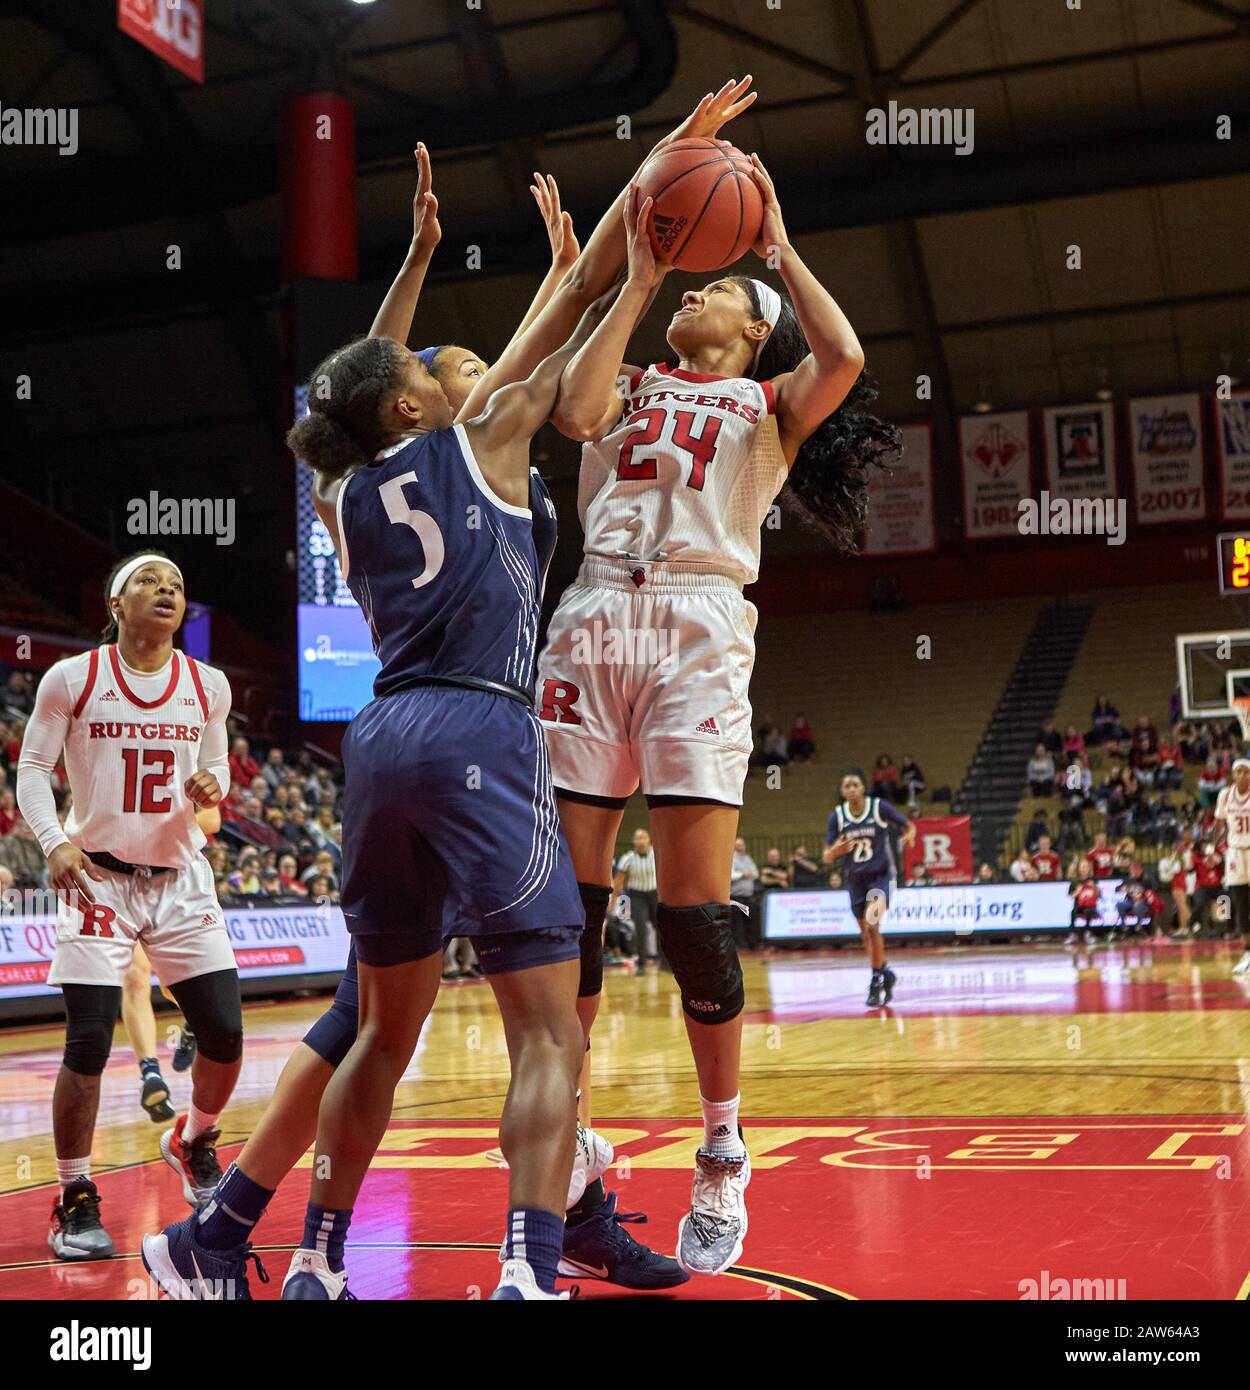 Piscataway, New Jersey, USA. 6th Feb, 2020. Rutgers Scarlet Knights guard Arella Guirantes (24) is fouled byPenn State Nittany Lions guard Kamaria McDaniel (5) in the second half during a game between the Penn State Nittany Lions and the Rutgers Scarlet Knights at Rutgers Athletic Center in Piscataway, New Jersey. Rutgers defeated Penn State 72-39. Duncan Williams/CSM/Alamy Live News Stock Photo